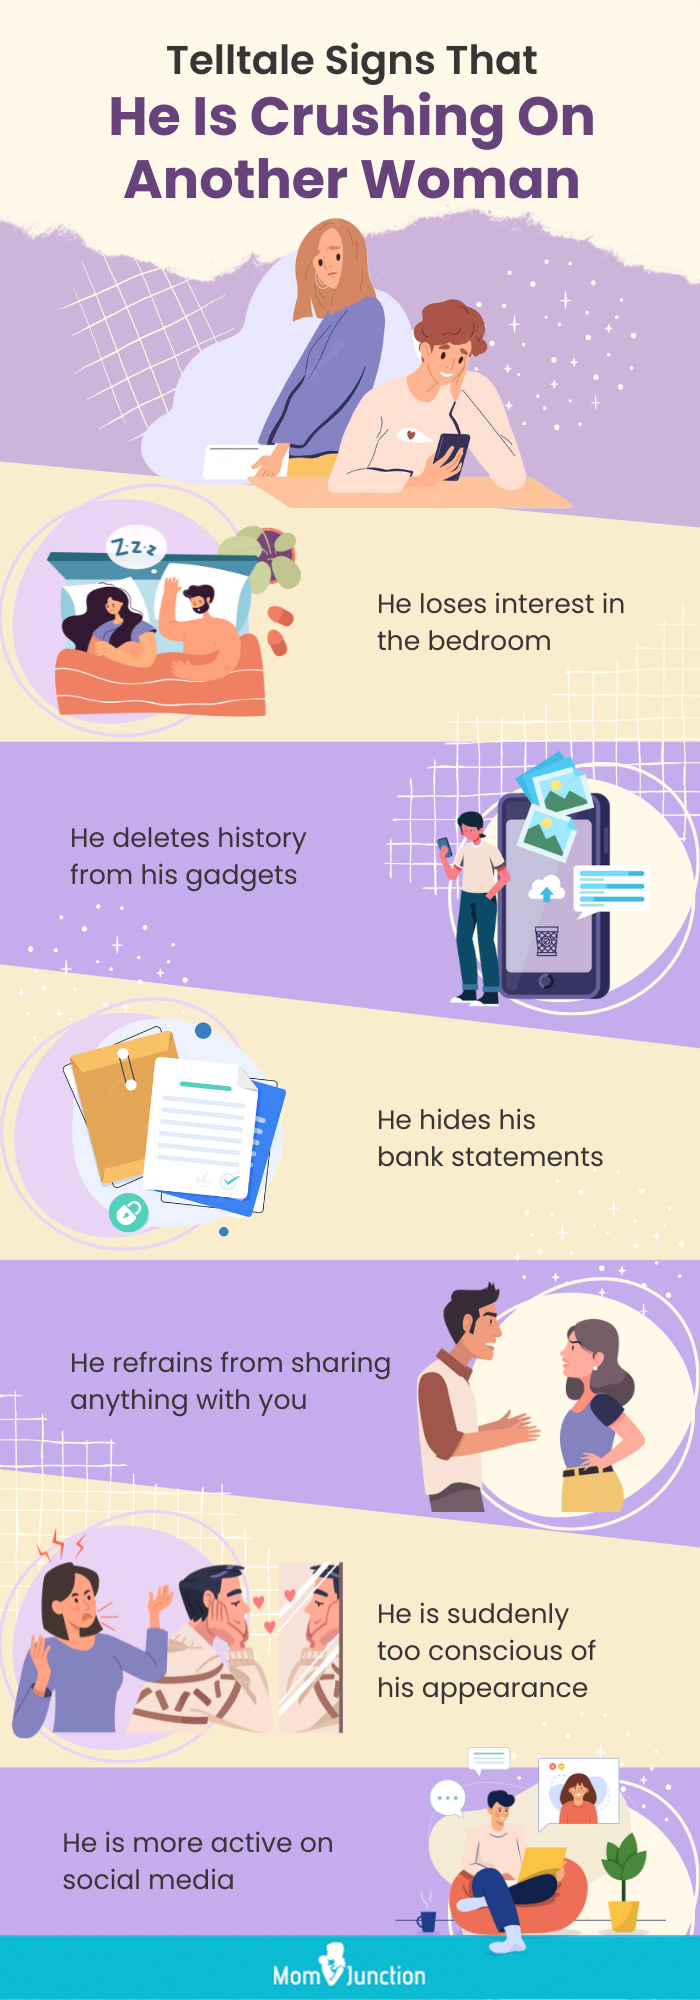 telltale signs that he is crushing on another woman (infographic)